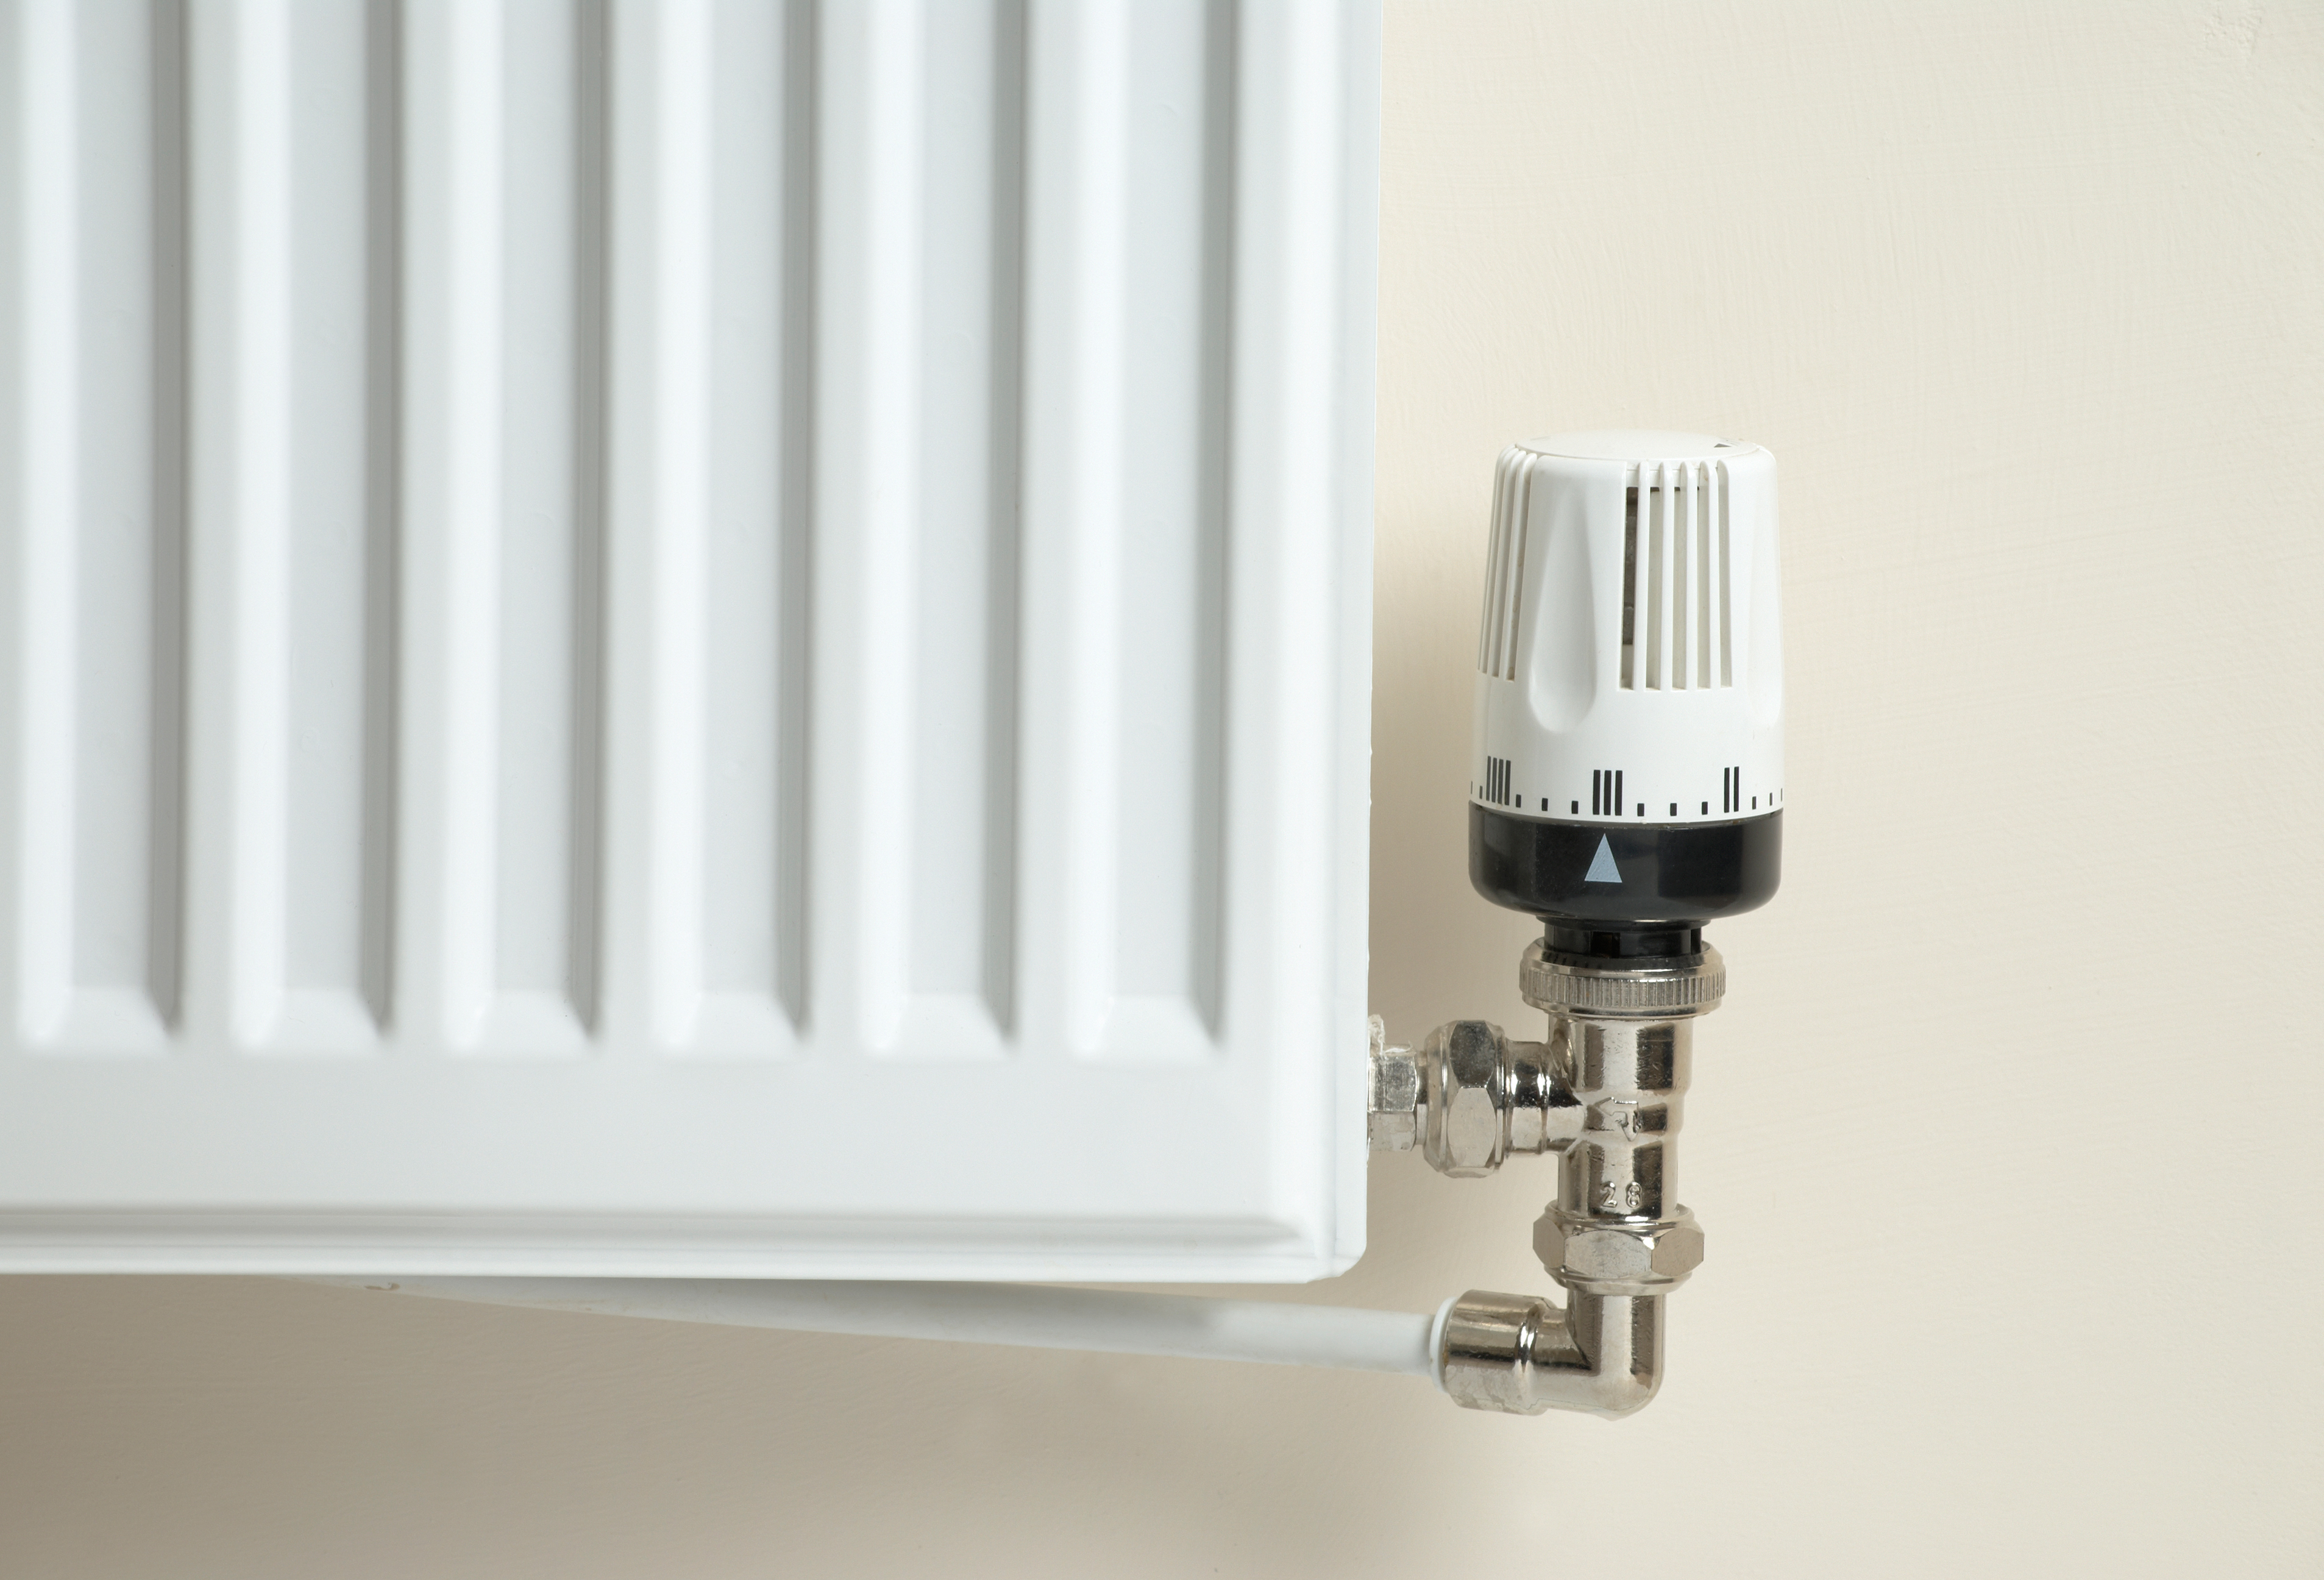 A radiator with nozzle